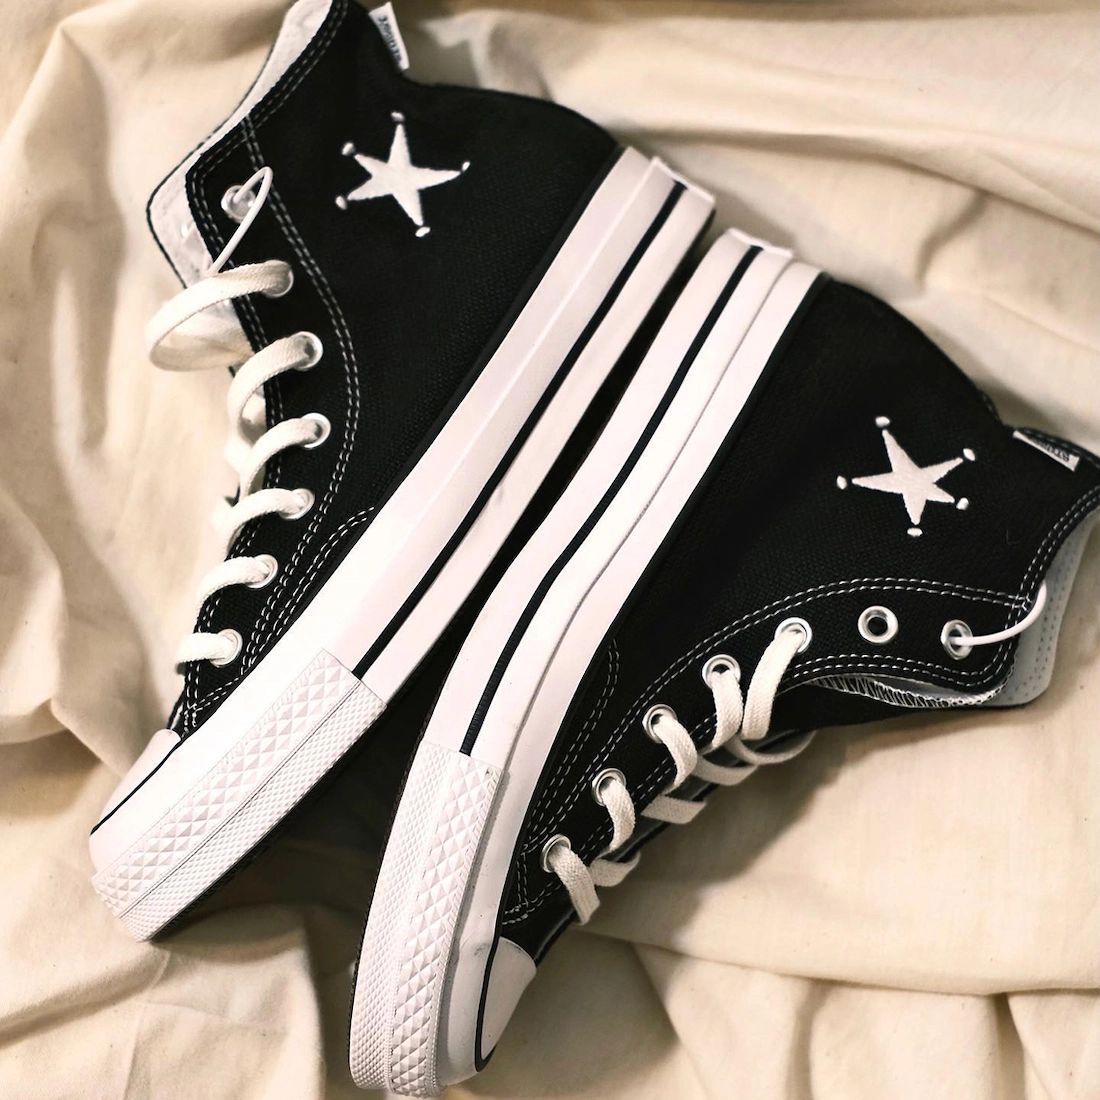 Stussy Converse Chuck Taylor All-Star Release Date Info